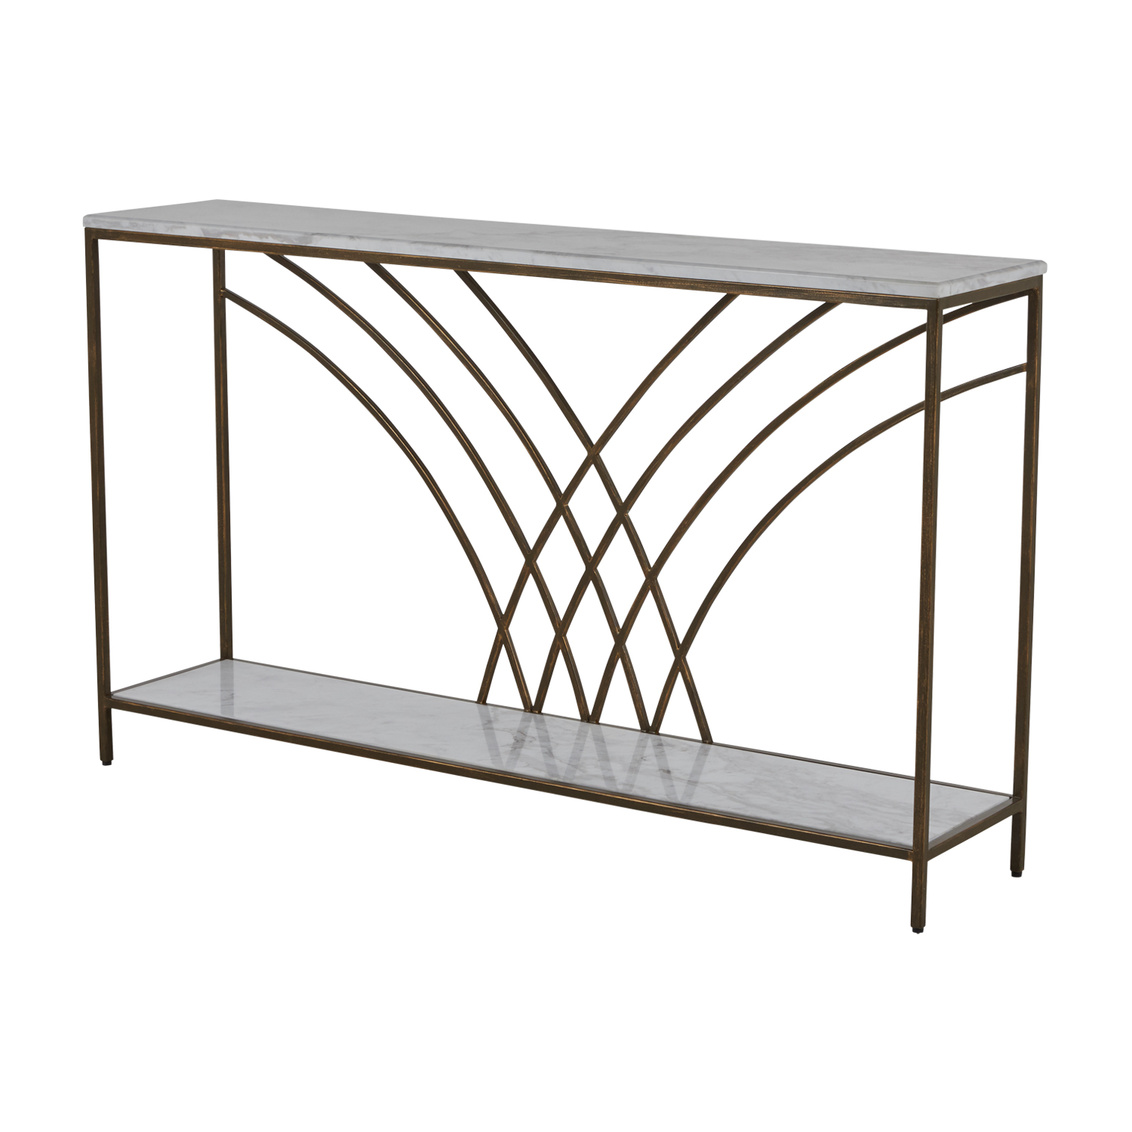 Curling Console Table-$1,445.00